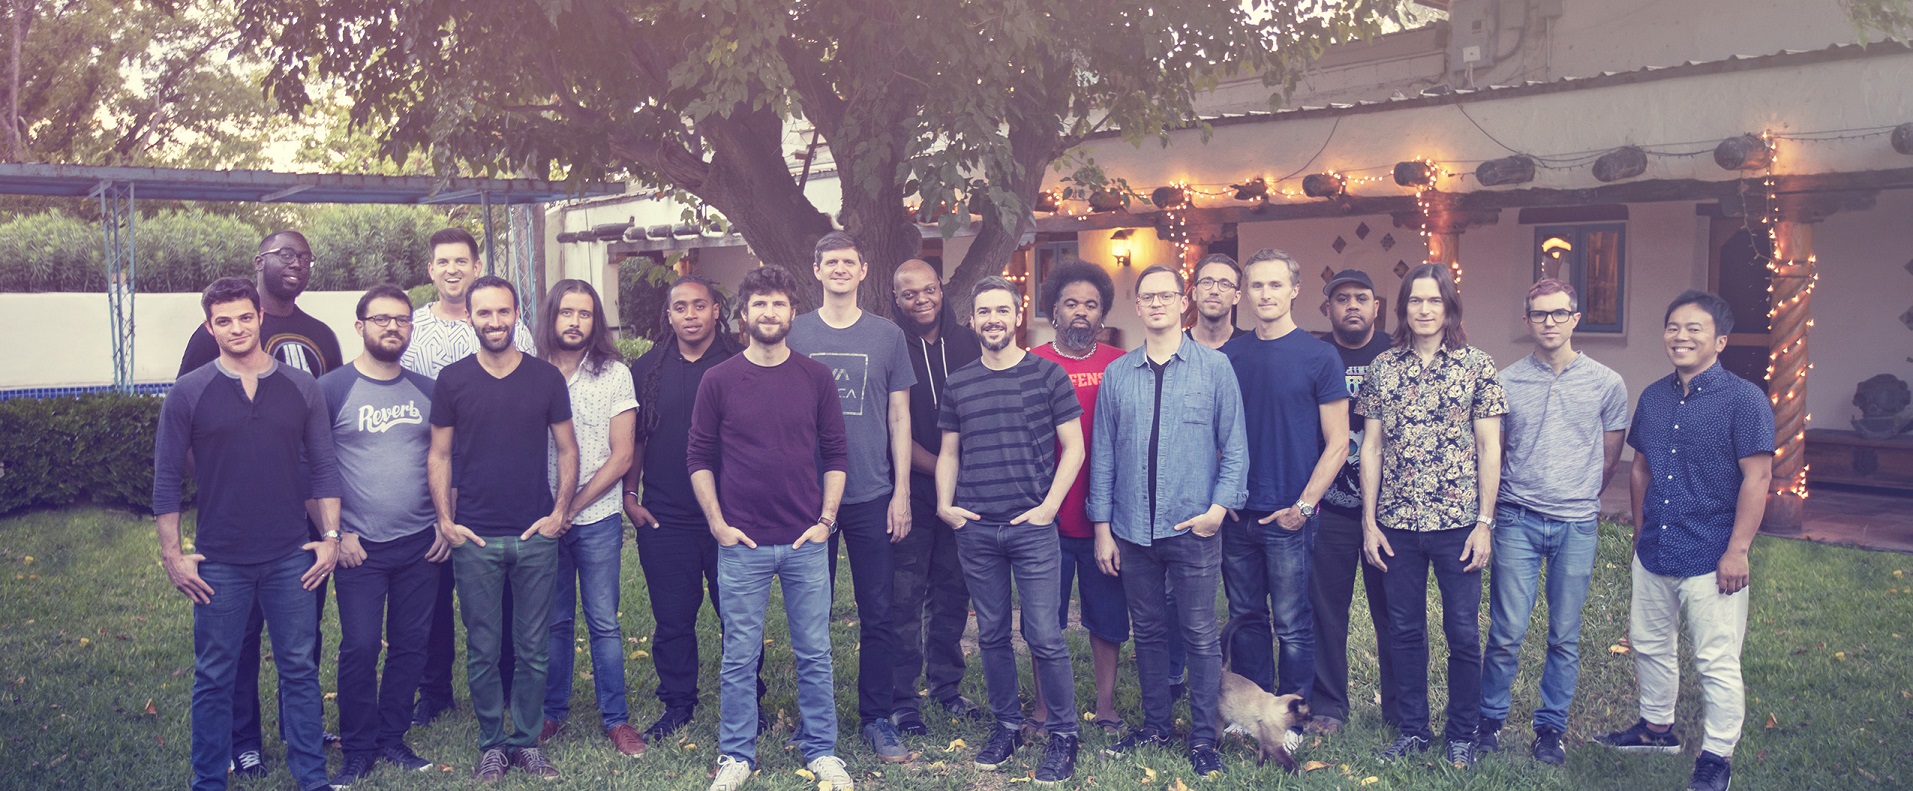 Snarky Puppy band image